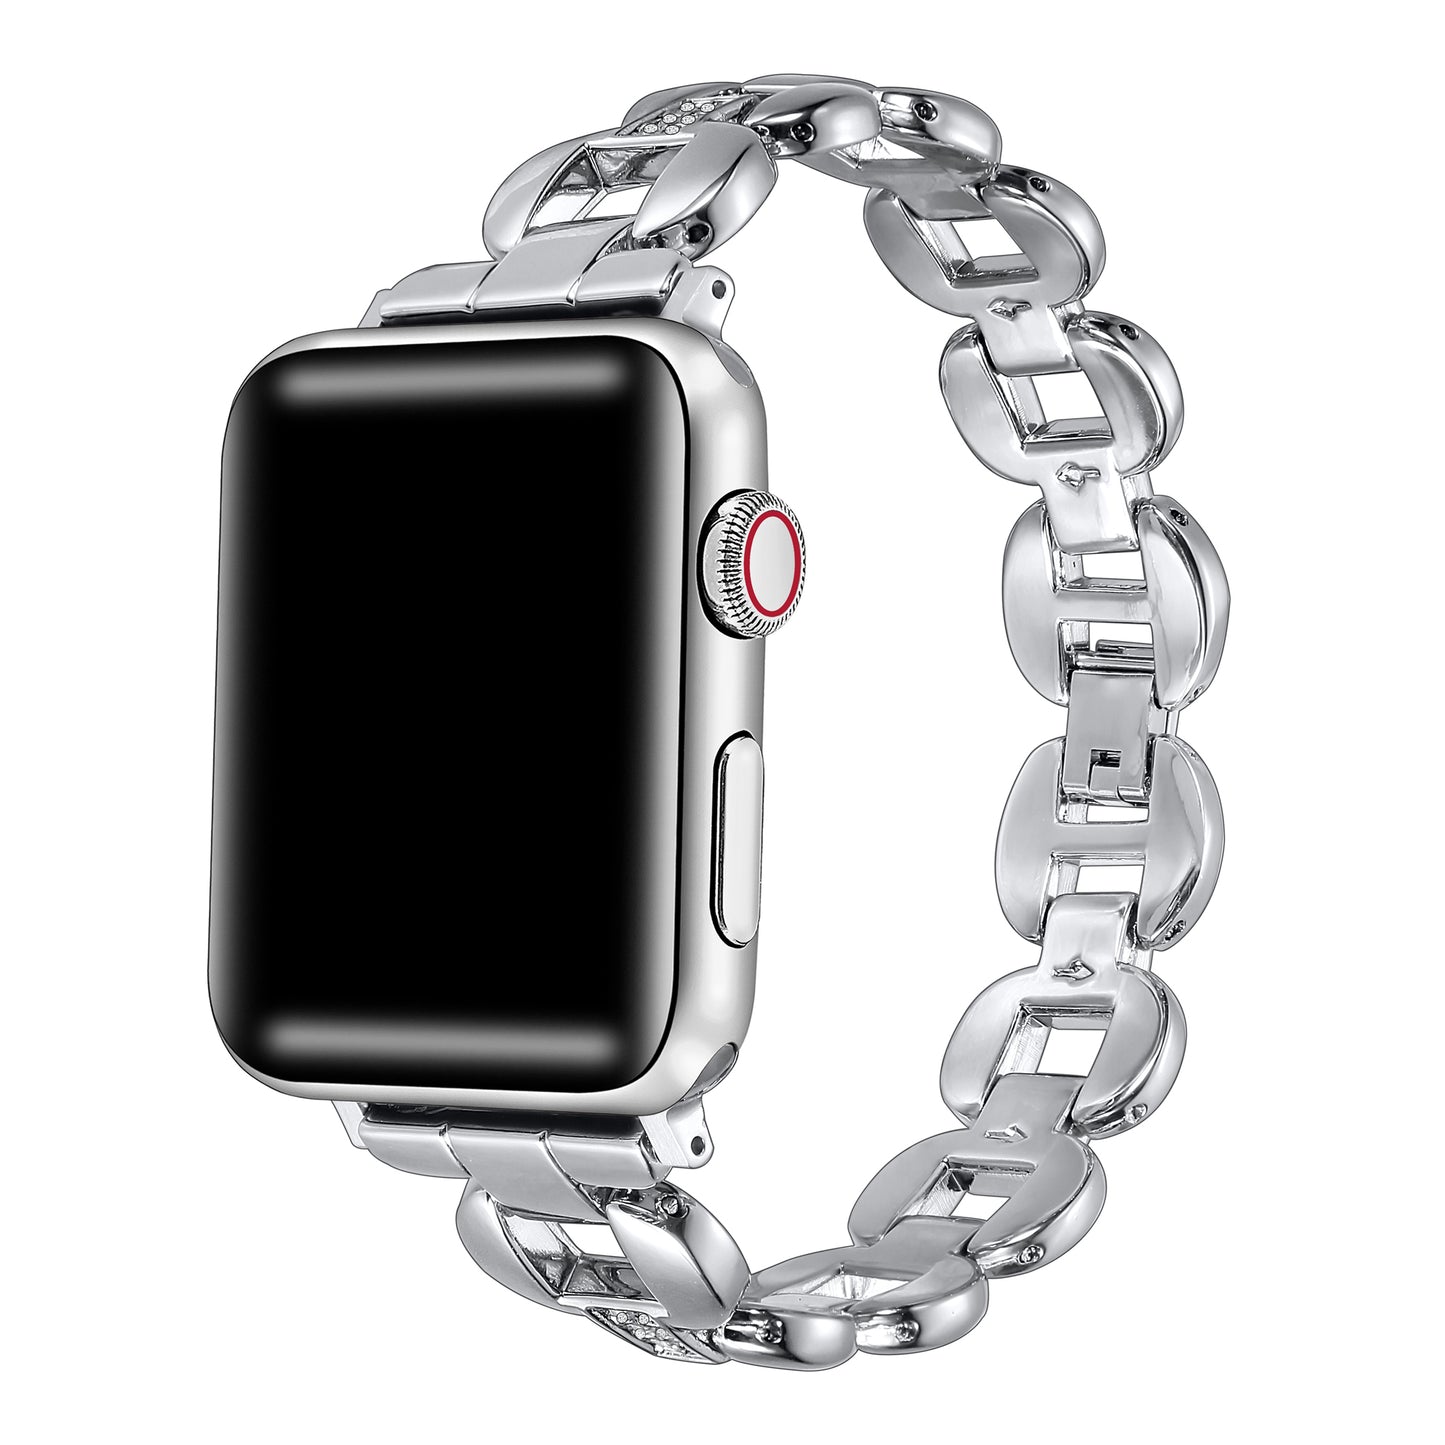 Joy Replacement Band for Apple Watch - Silver